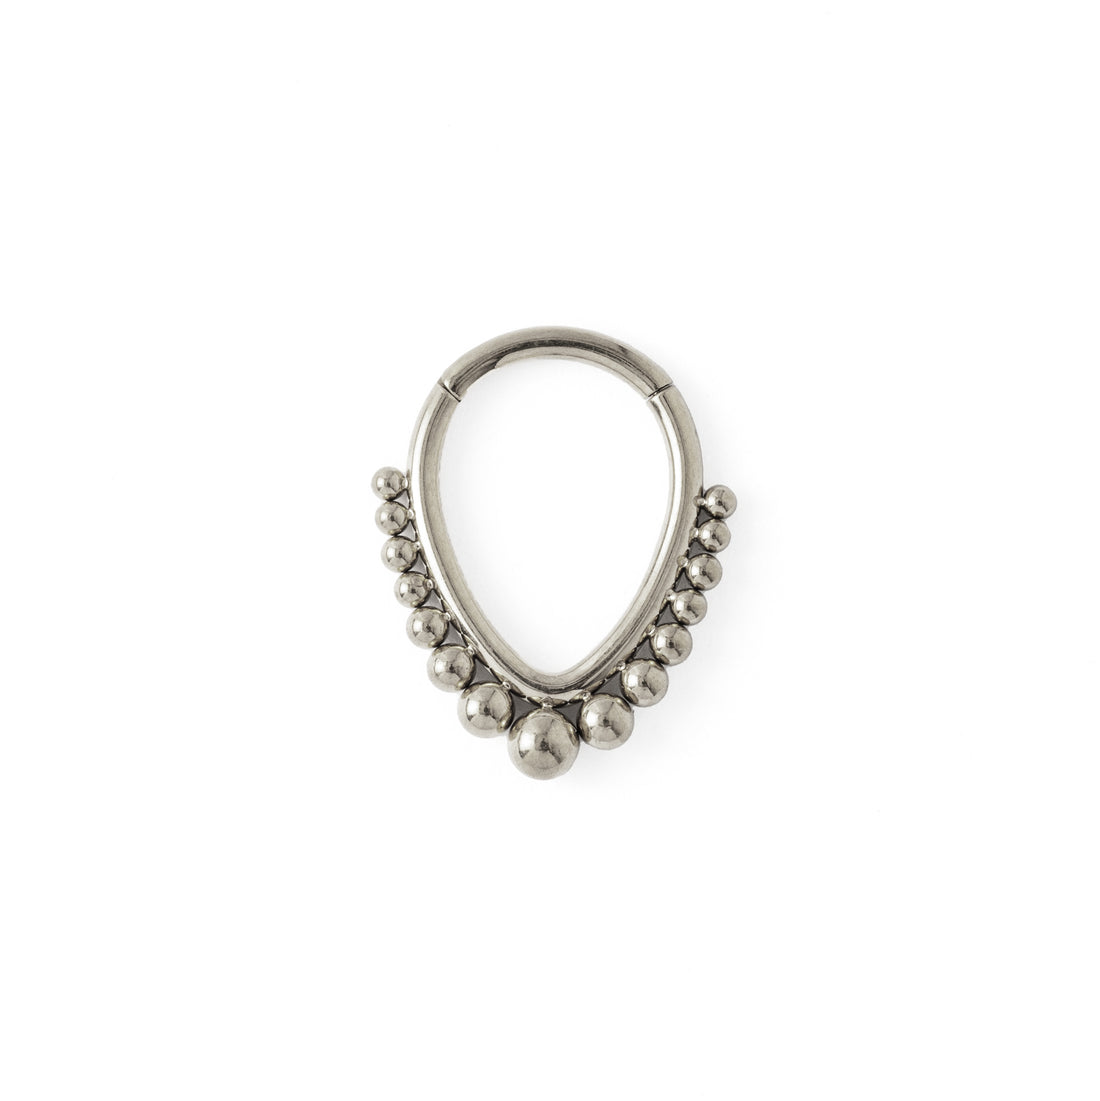 Althea Teardrop surgical steel Septum Clicker ring frontal view